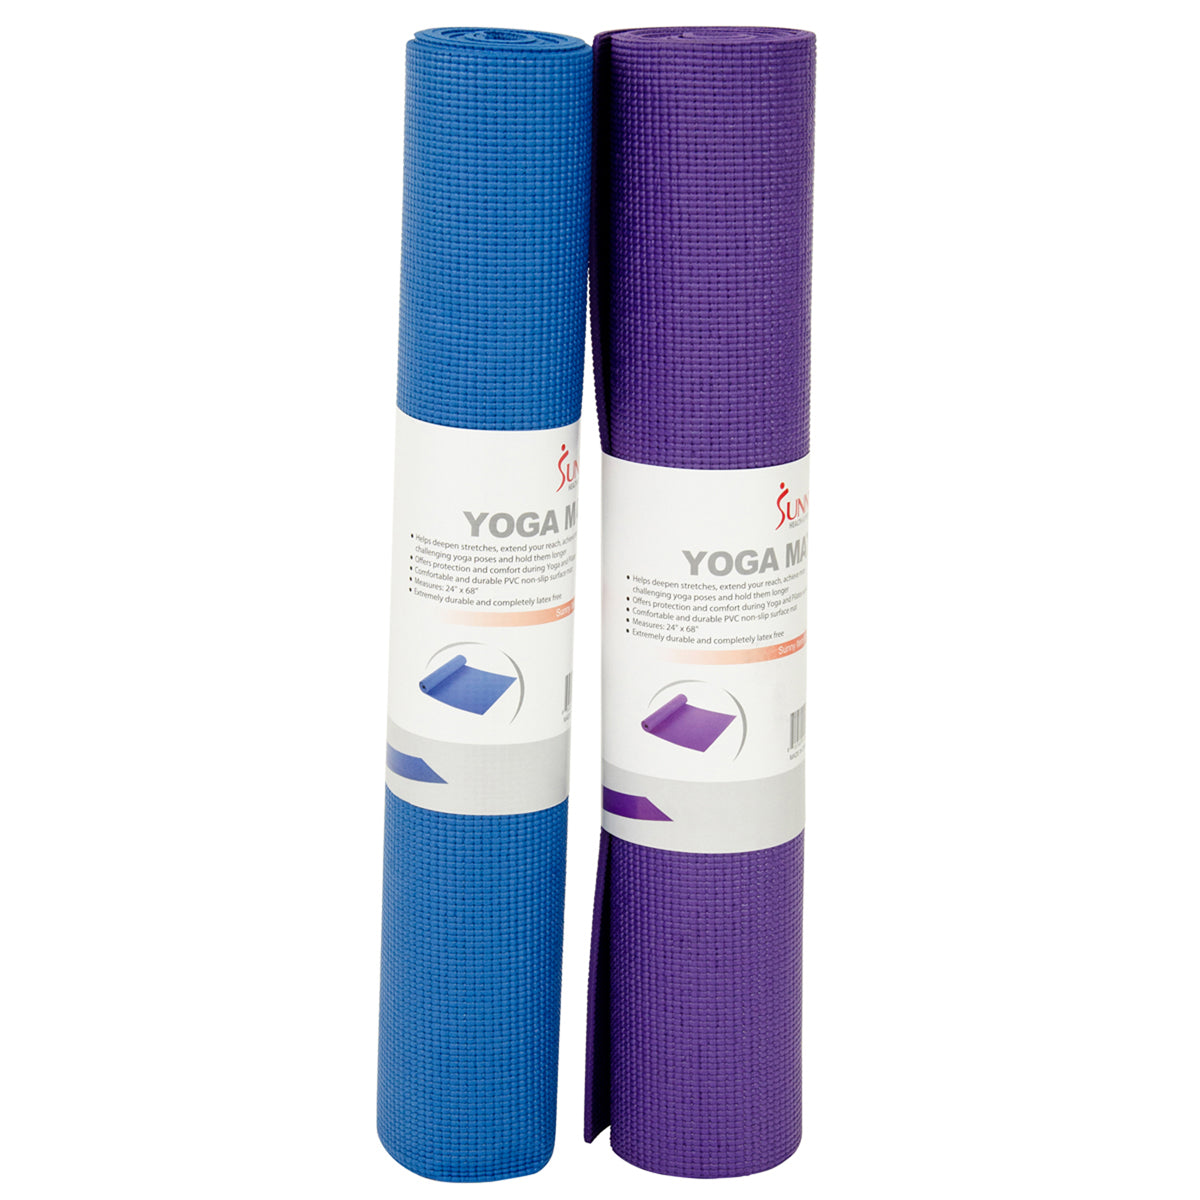 Textured Natural Rubber Yoga Mat by YOGA Accessories – Yoga